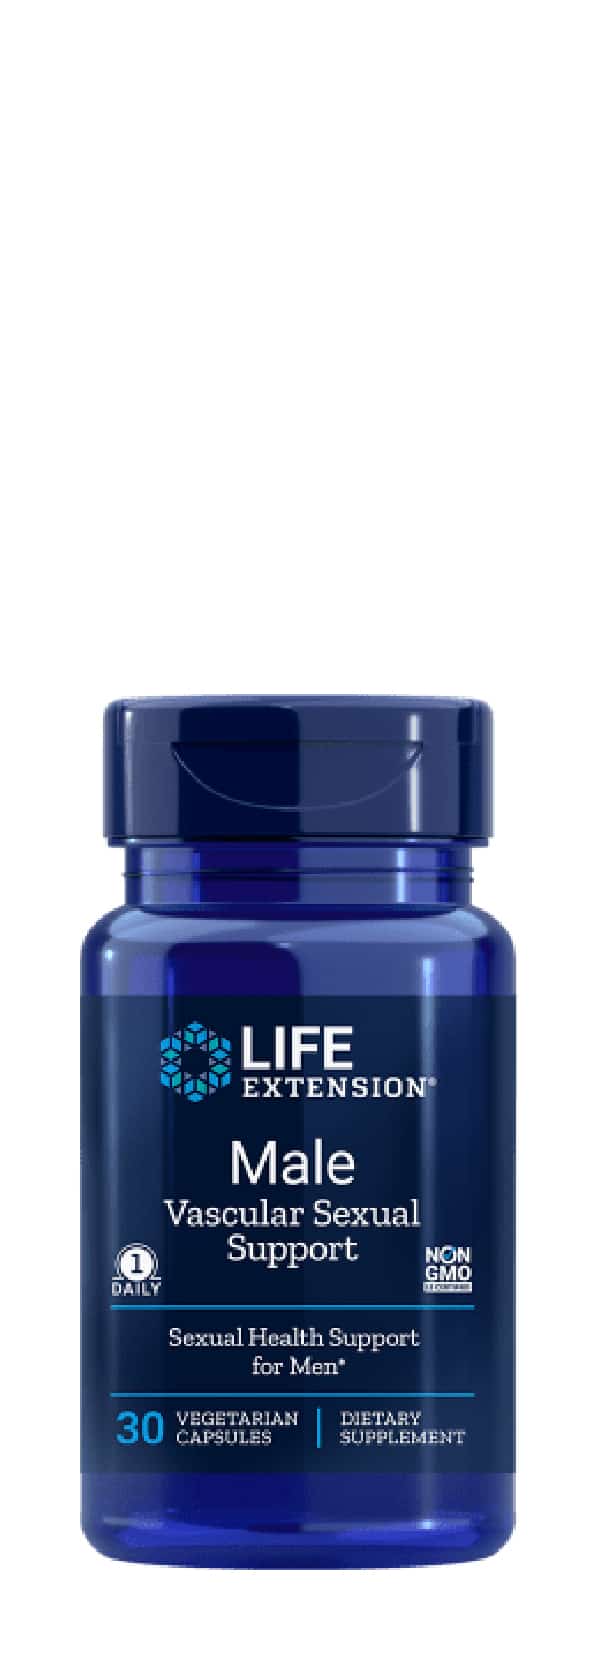 Buy Life Extension Male Vascular Sexual Support at LiveHelfi